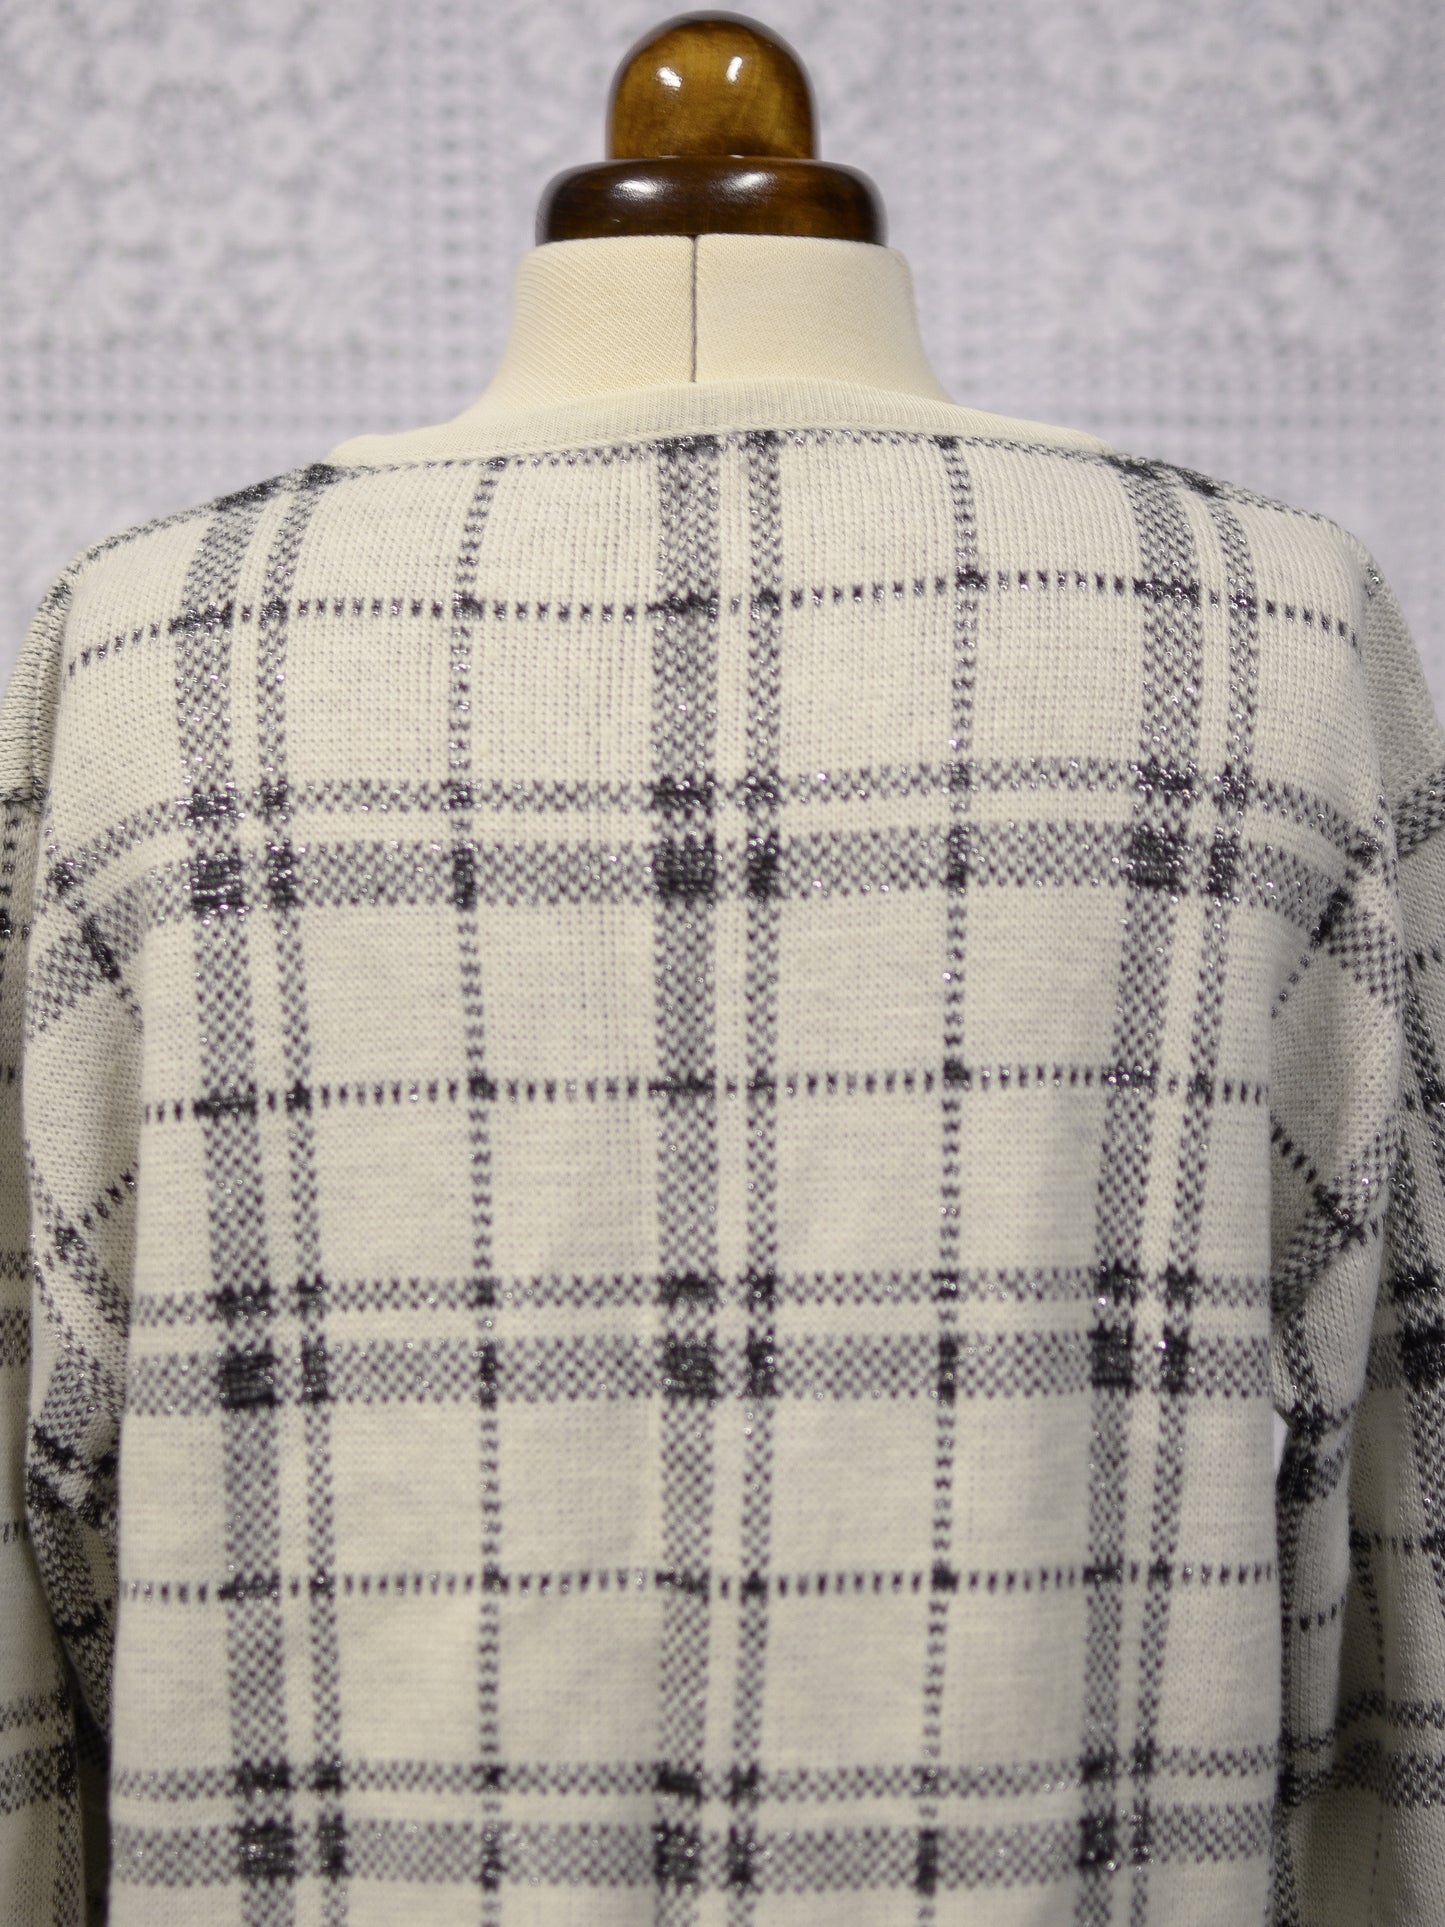 1980s cream, black and silver sparkly check floral rose pattern jumper